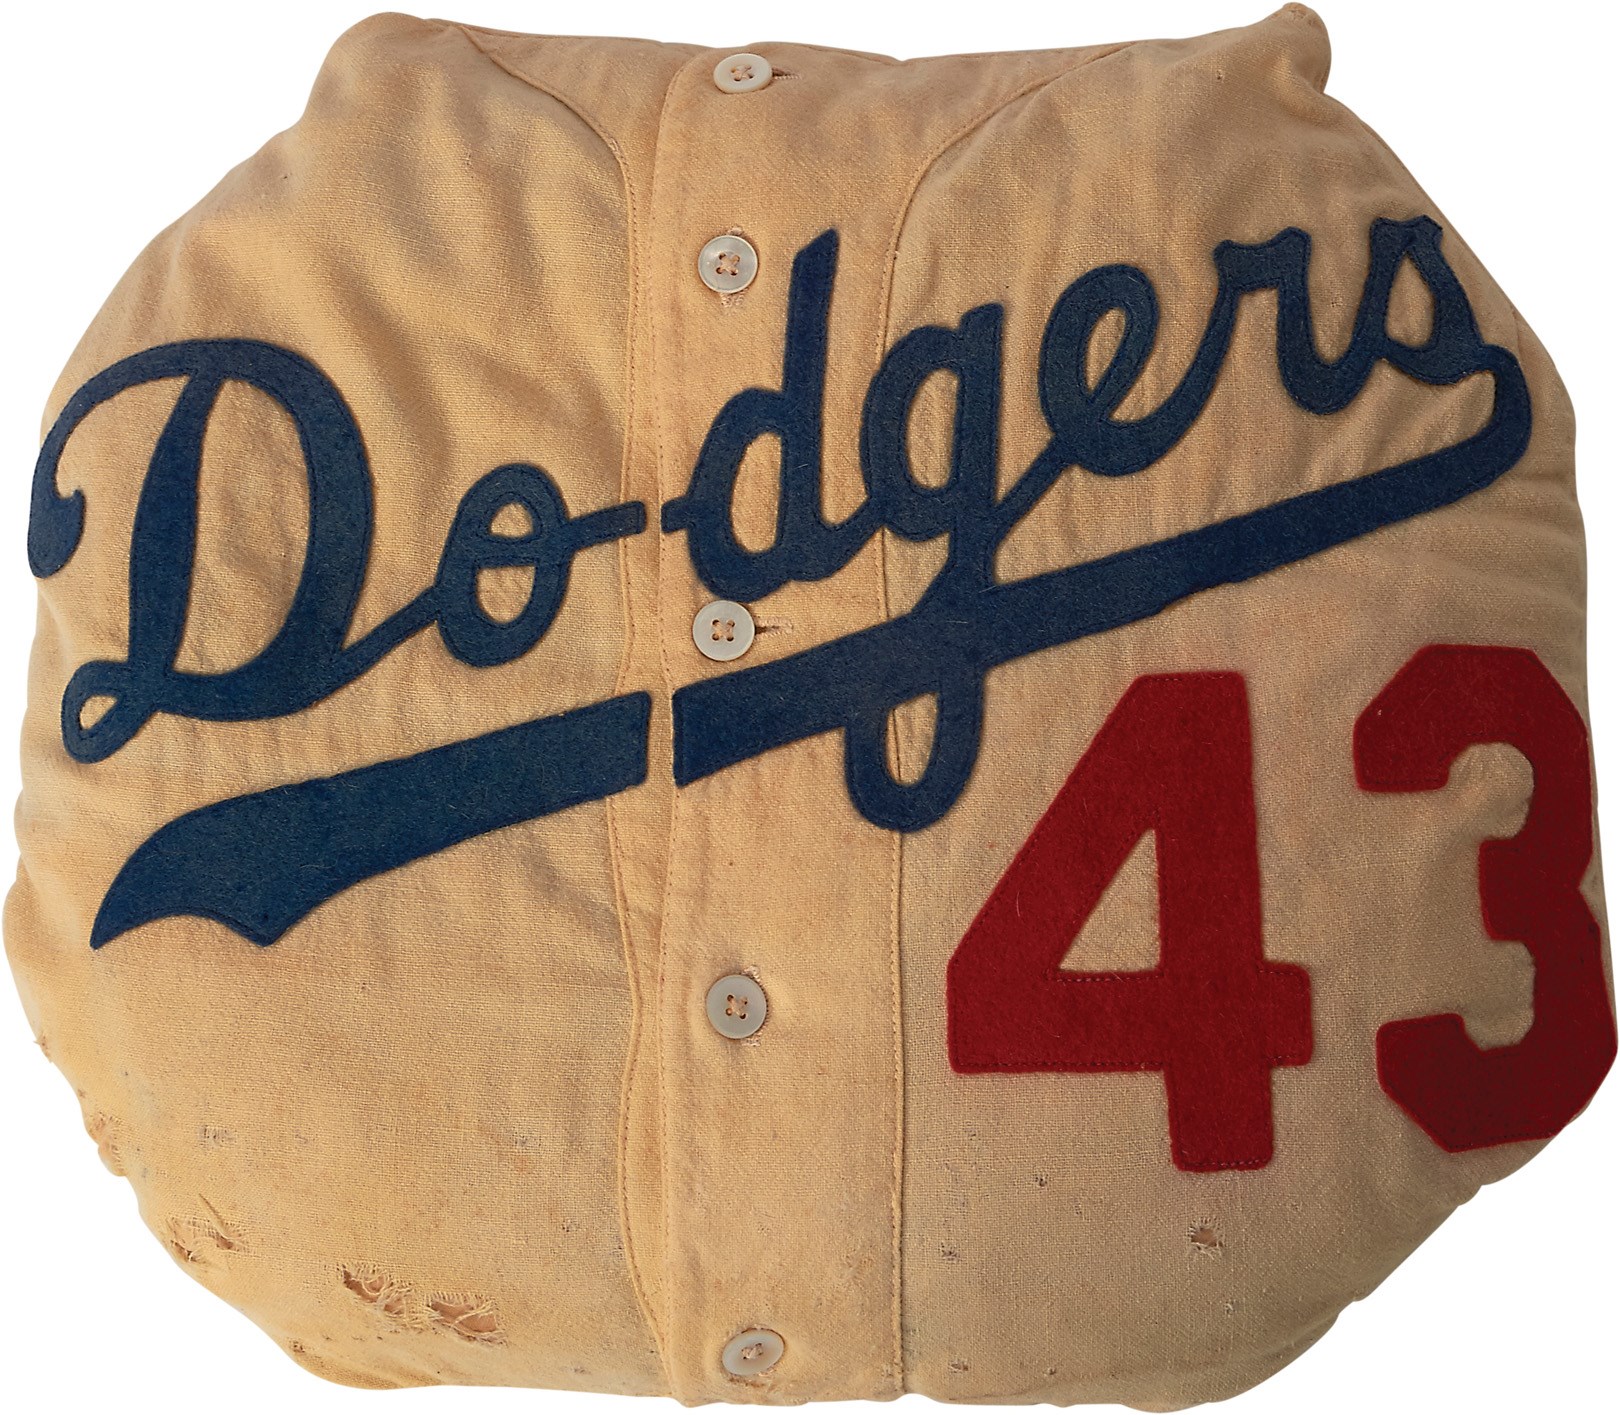 Jackie Robinson & Brooklyn Dodgers - 1950s Brooklyn Dodgers Game Worn Jersey Made Into Pillow by Paul Waner